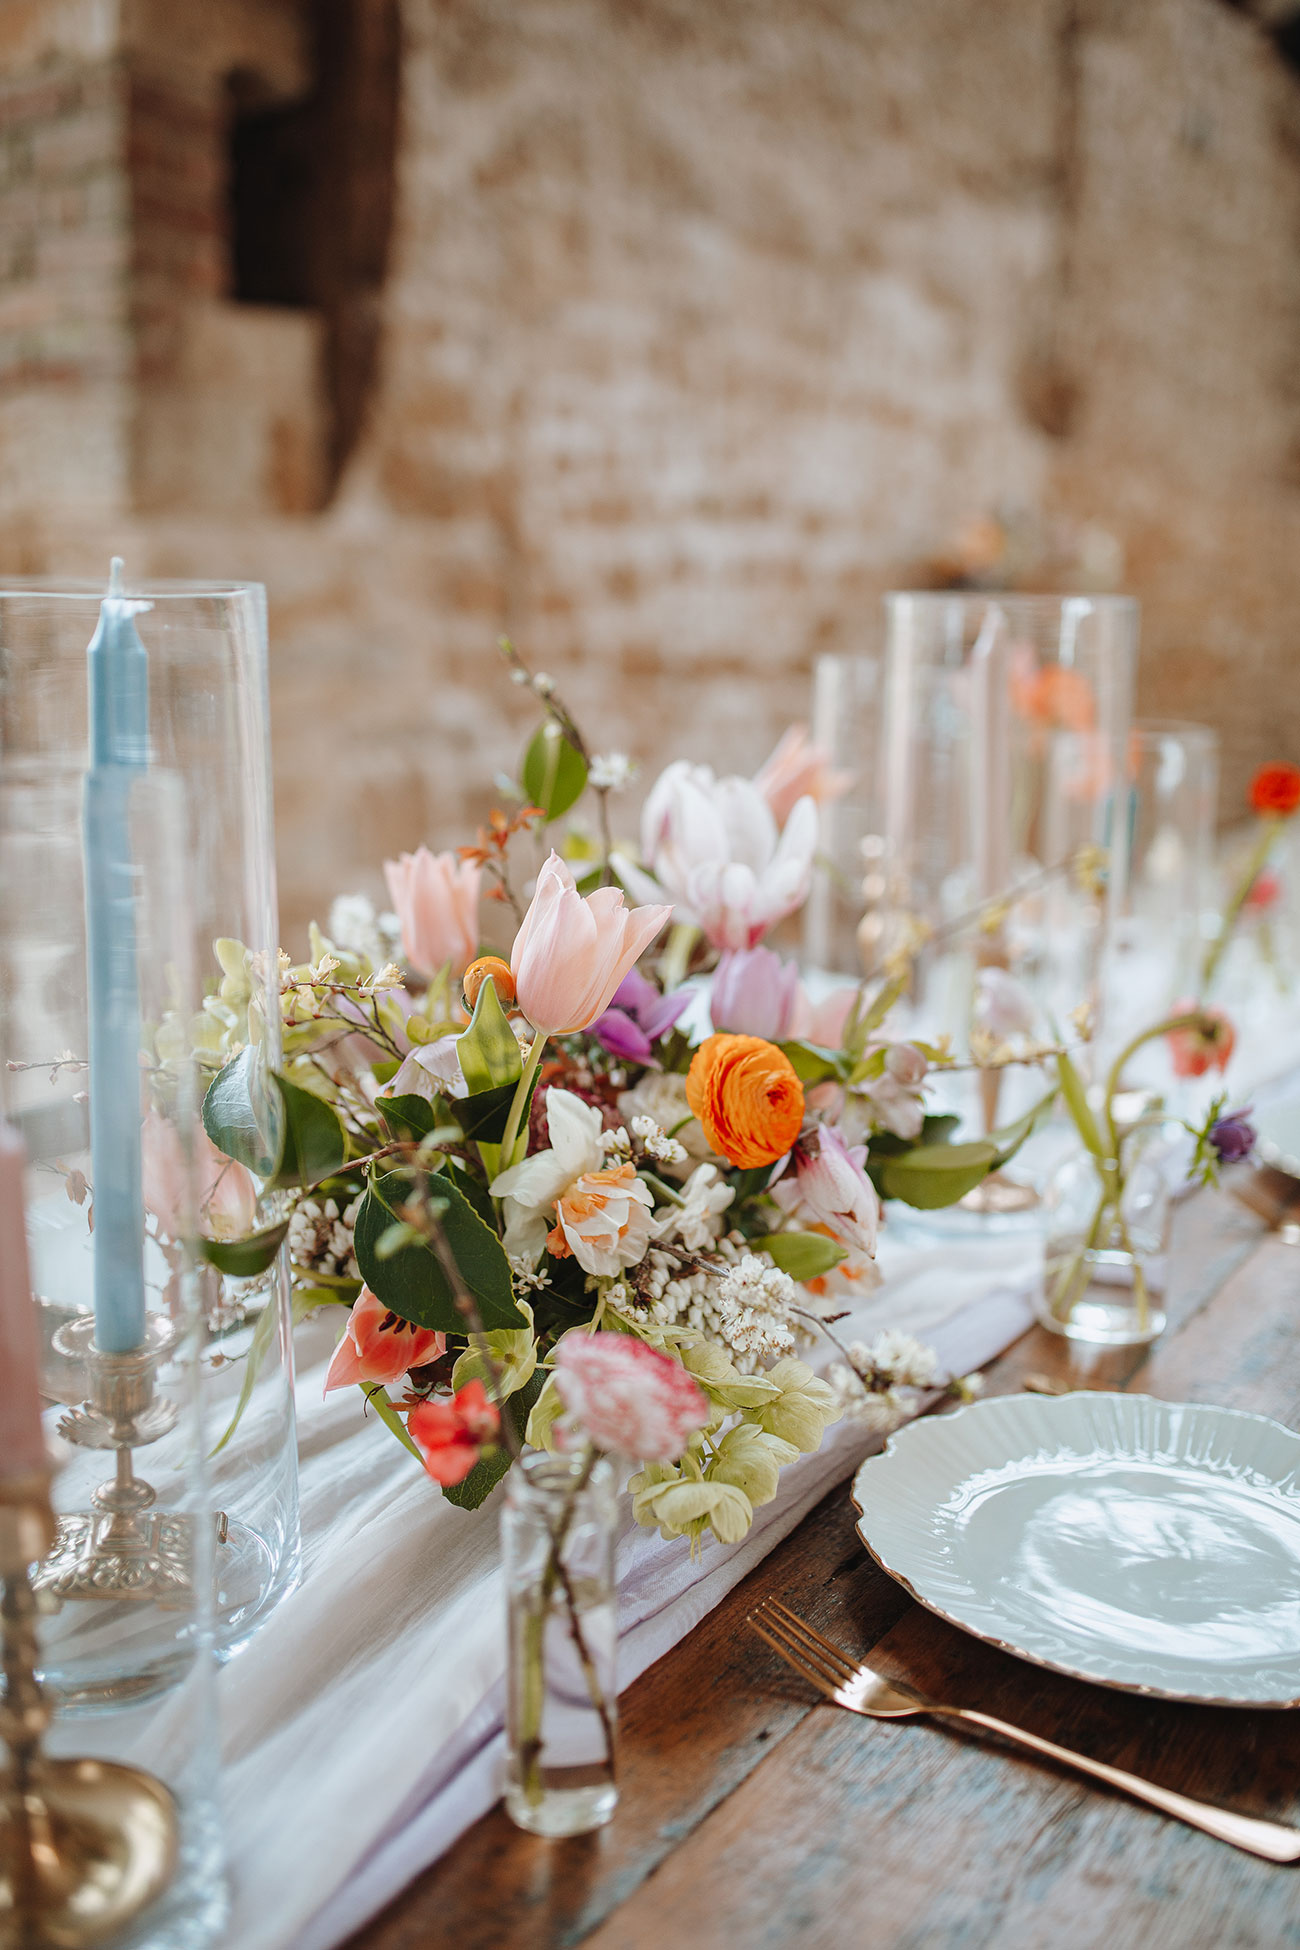 Wedding Styled Shoot Rustic Natural Florals Barn3